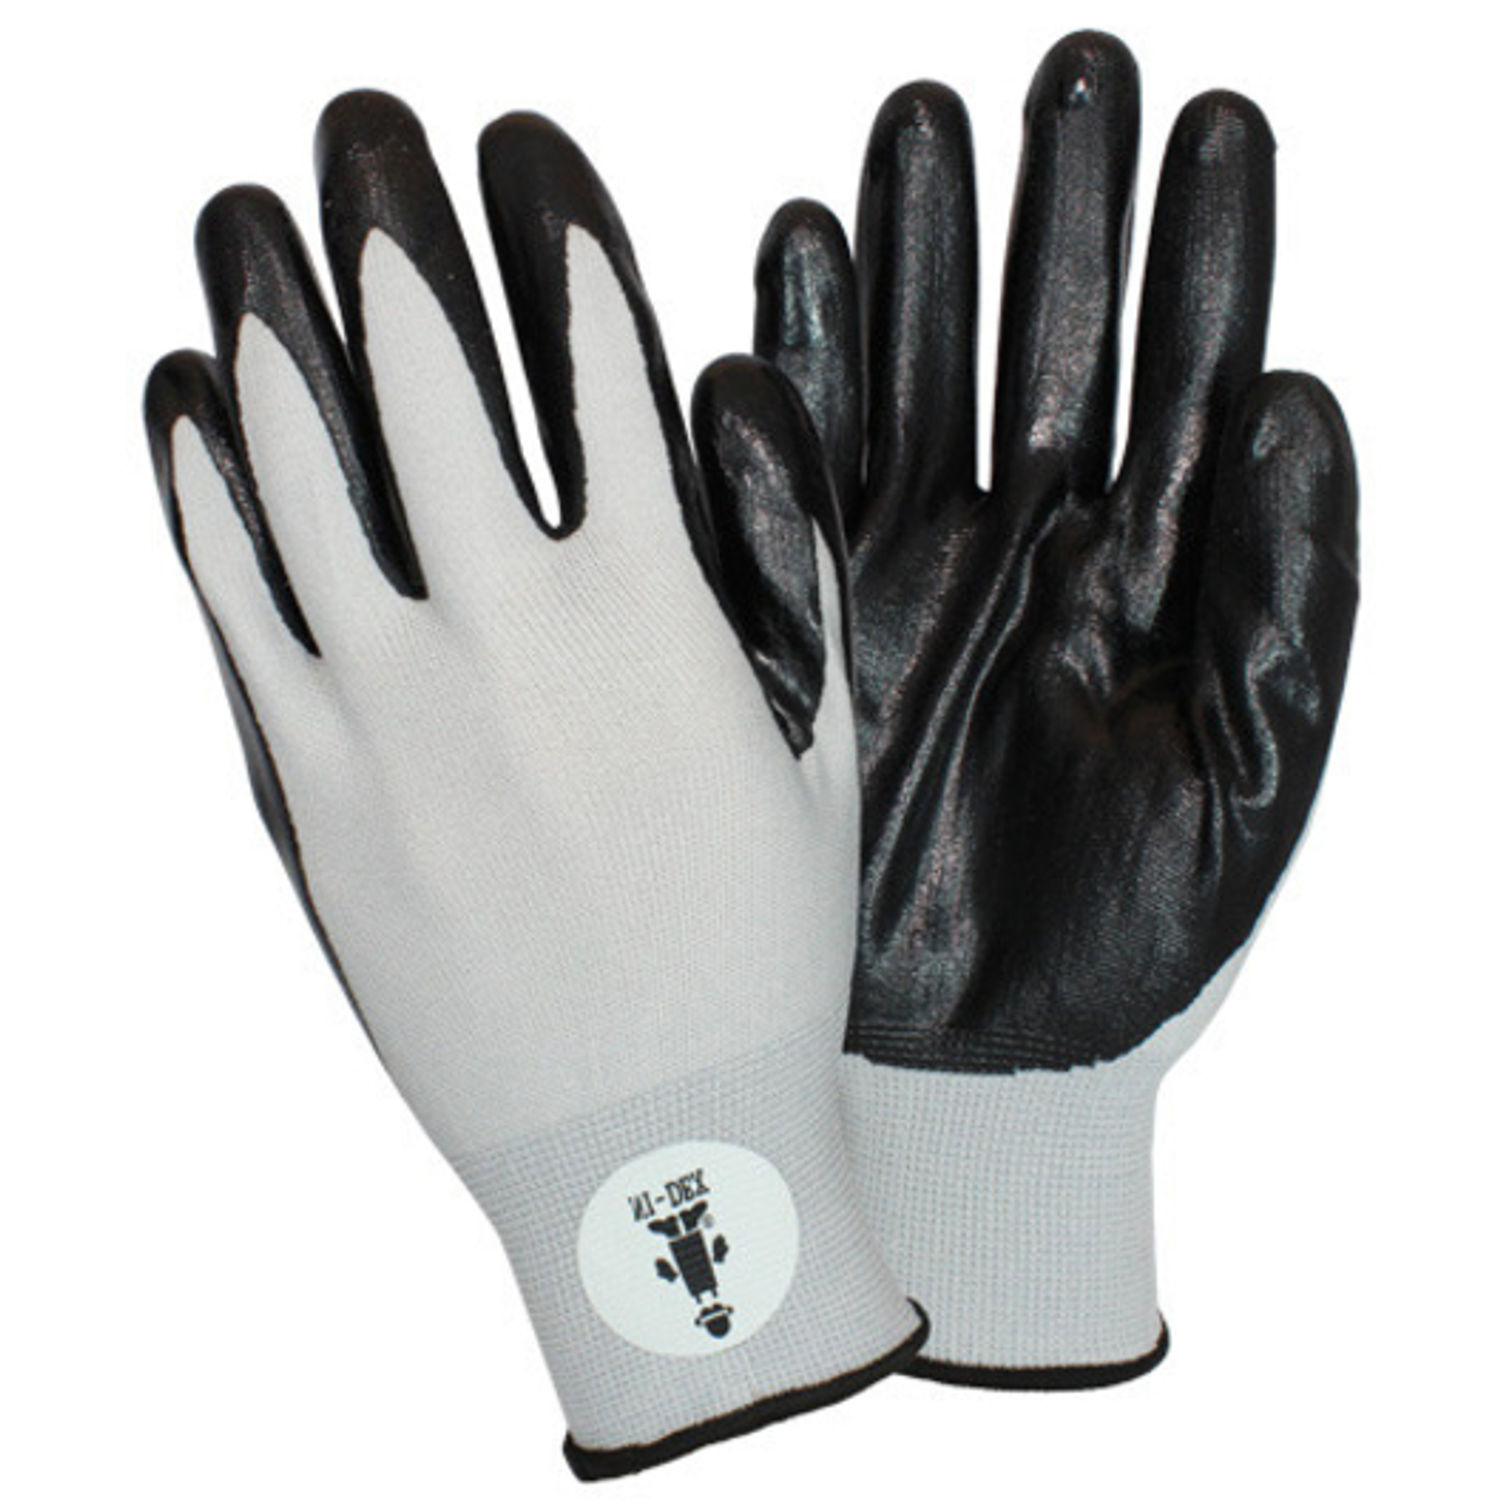 High Dexterity Glove with Thinsulate Palm & Velcro Cuff Medium Size, Synthetic Leather, Nylon, Black, Hook & Loop Cuff, Straight Thumb, Thinsulate Lining, Vibration Proof